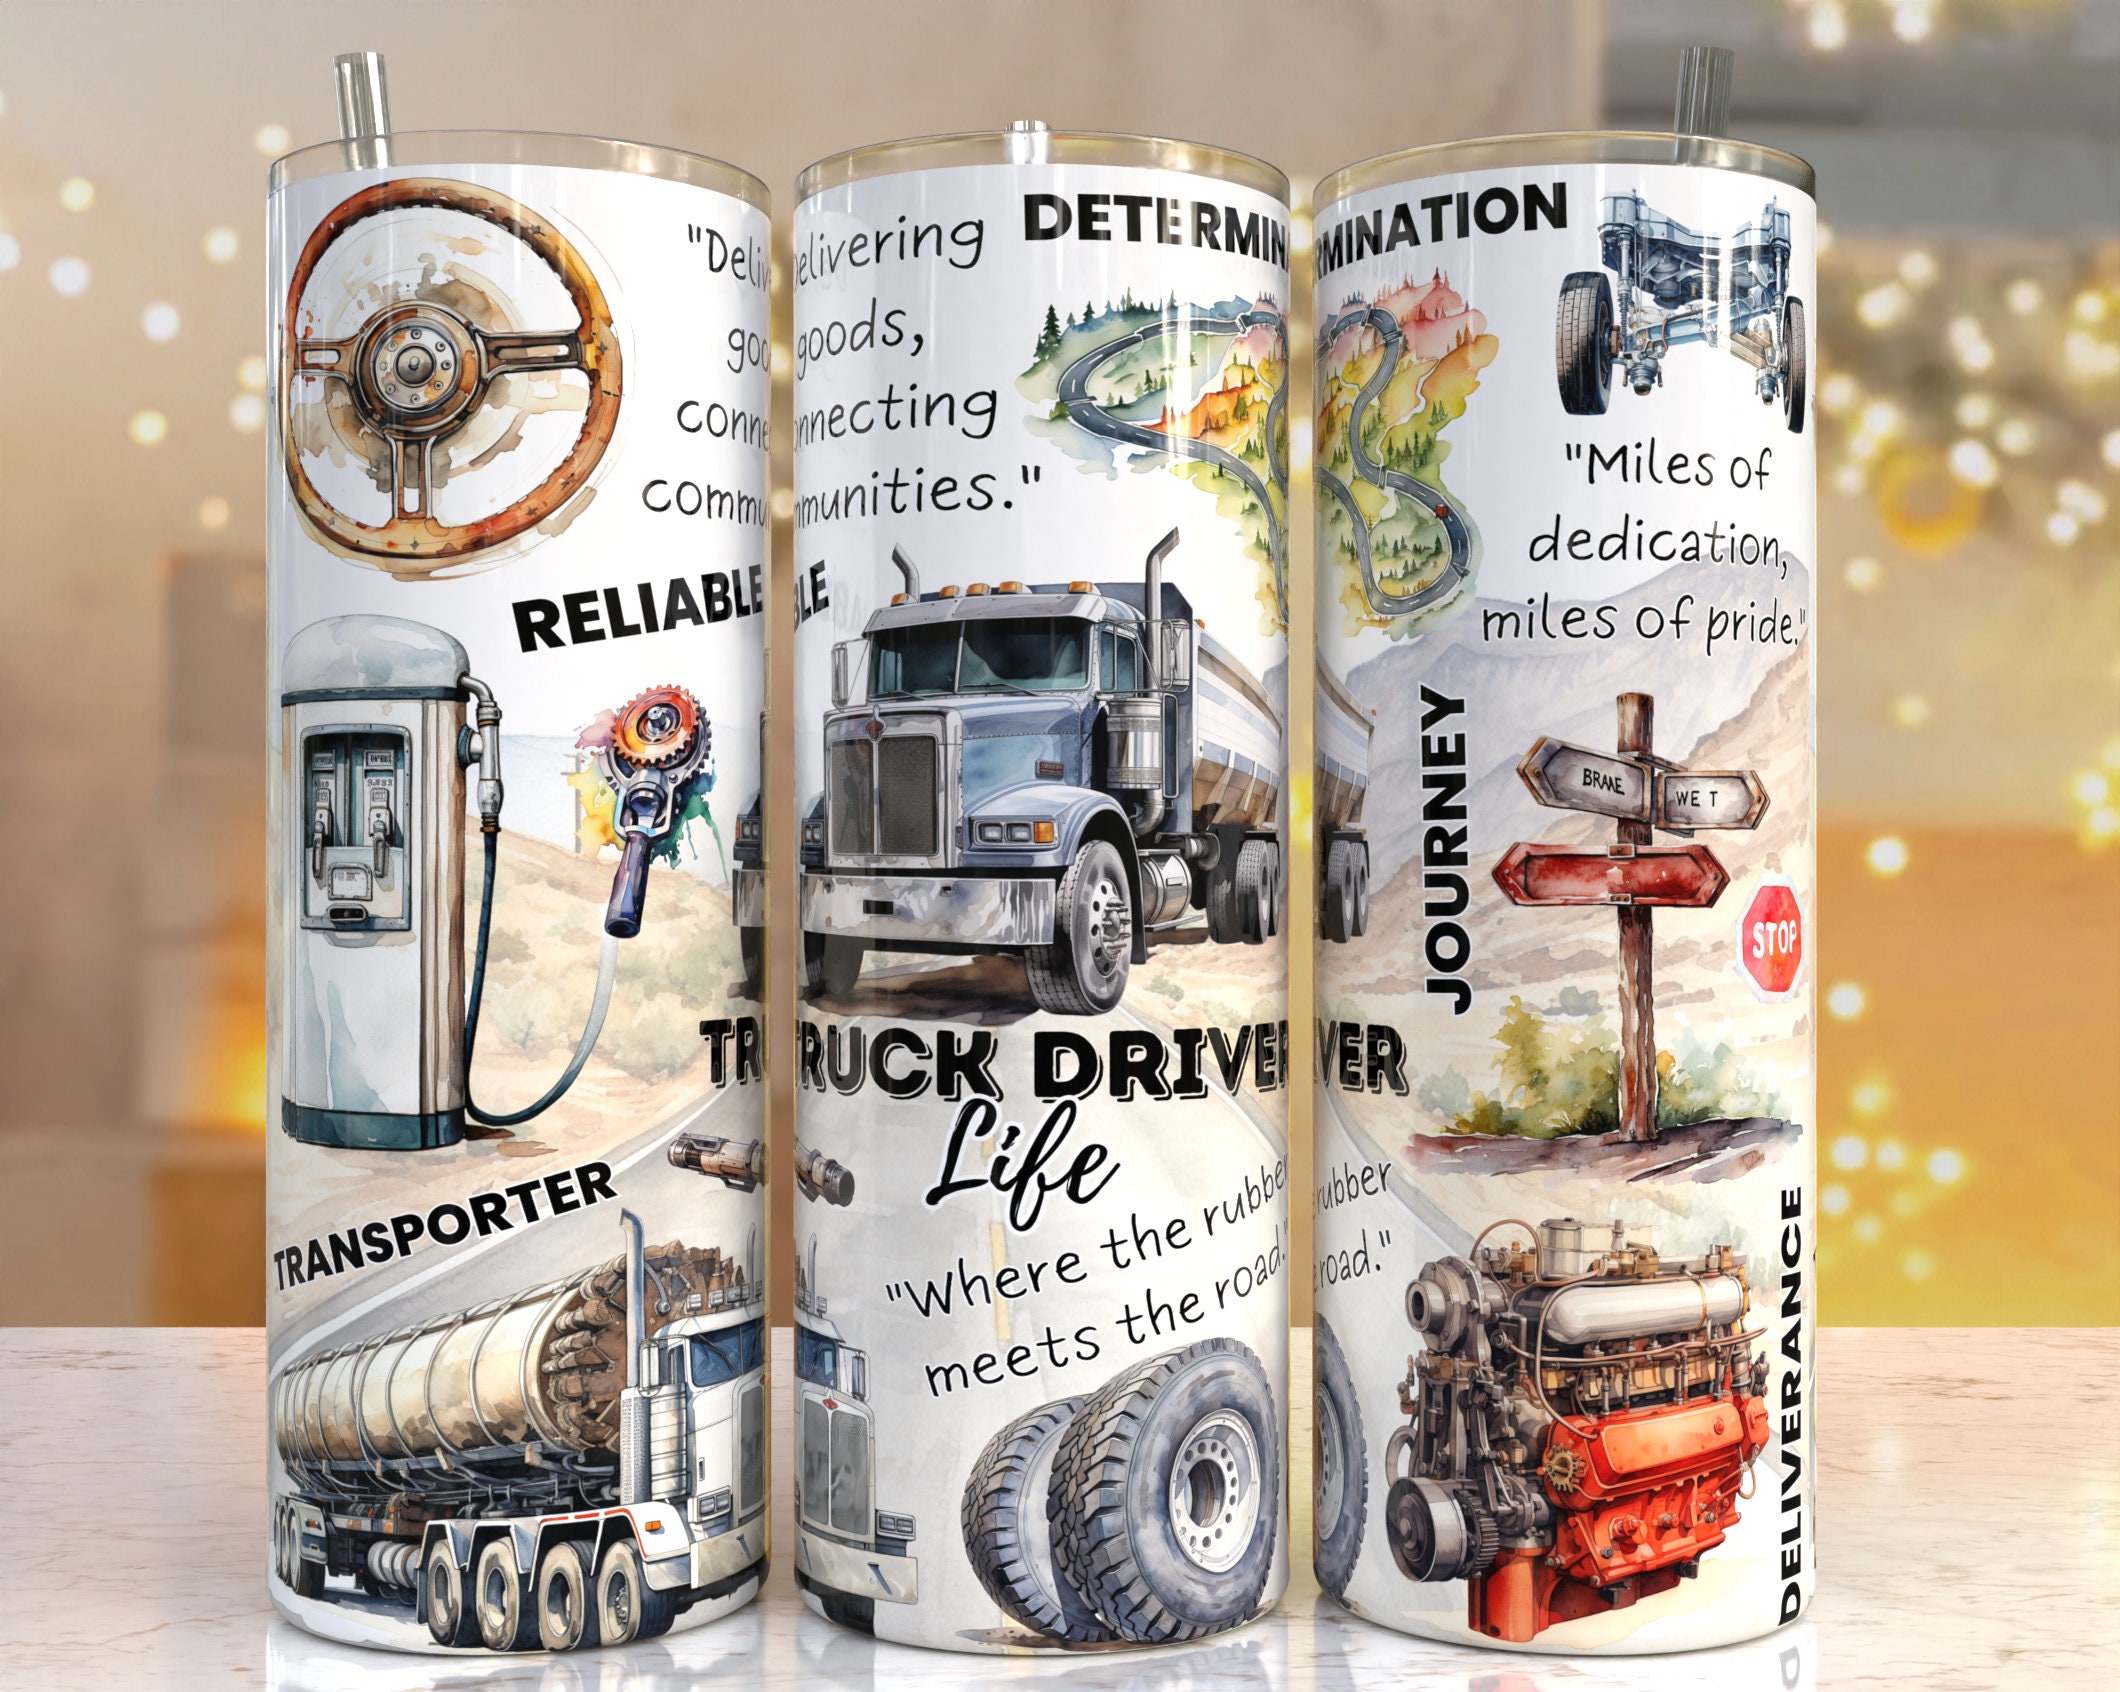 1pc 20oz Truck Driver Gifts for Men, Cool Gifts for Truck Drivers, Gifts  for Truckers, Night truck Tumbler Cup, Insulated Travel Coffee Mug with Lid